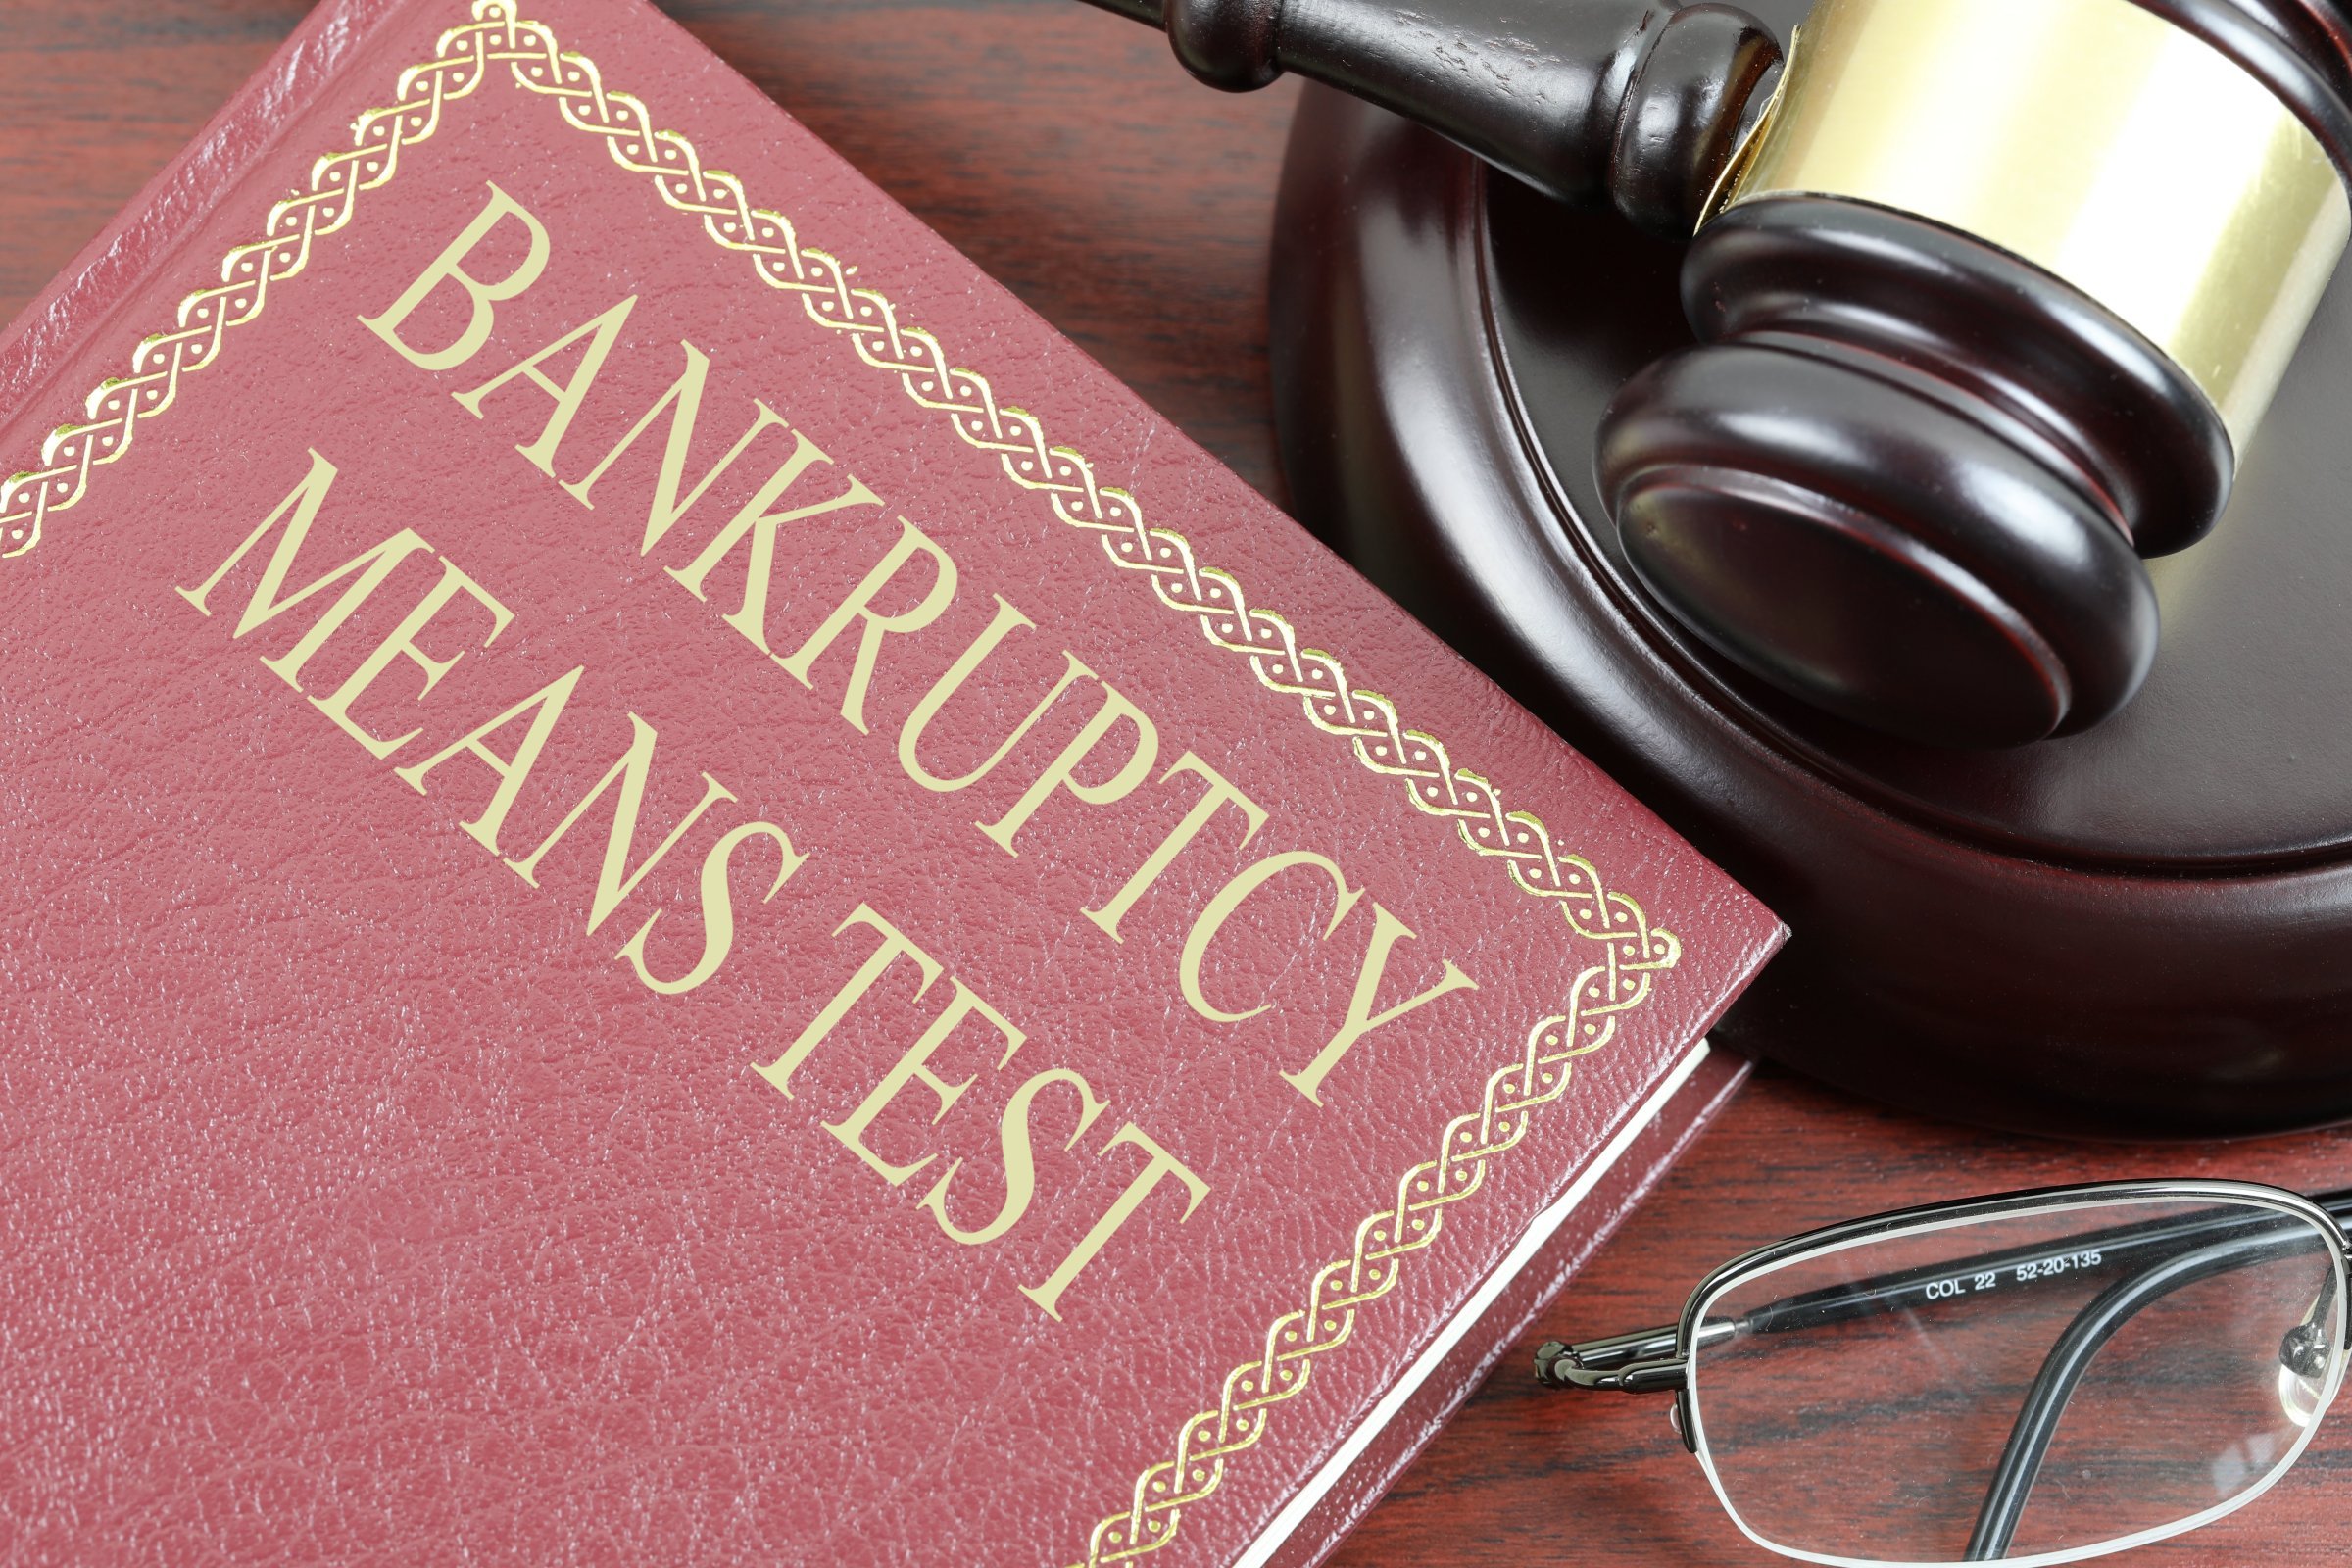 bankruptcy means test